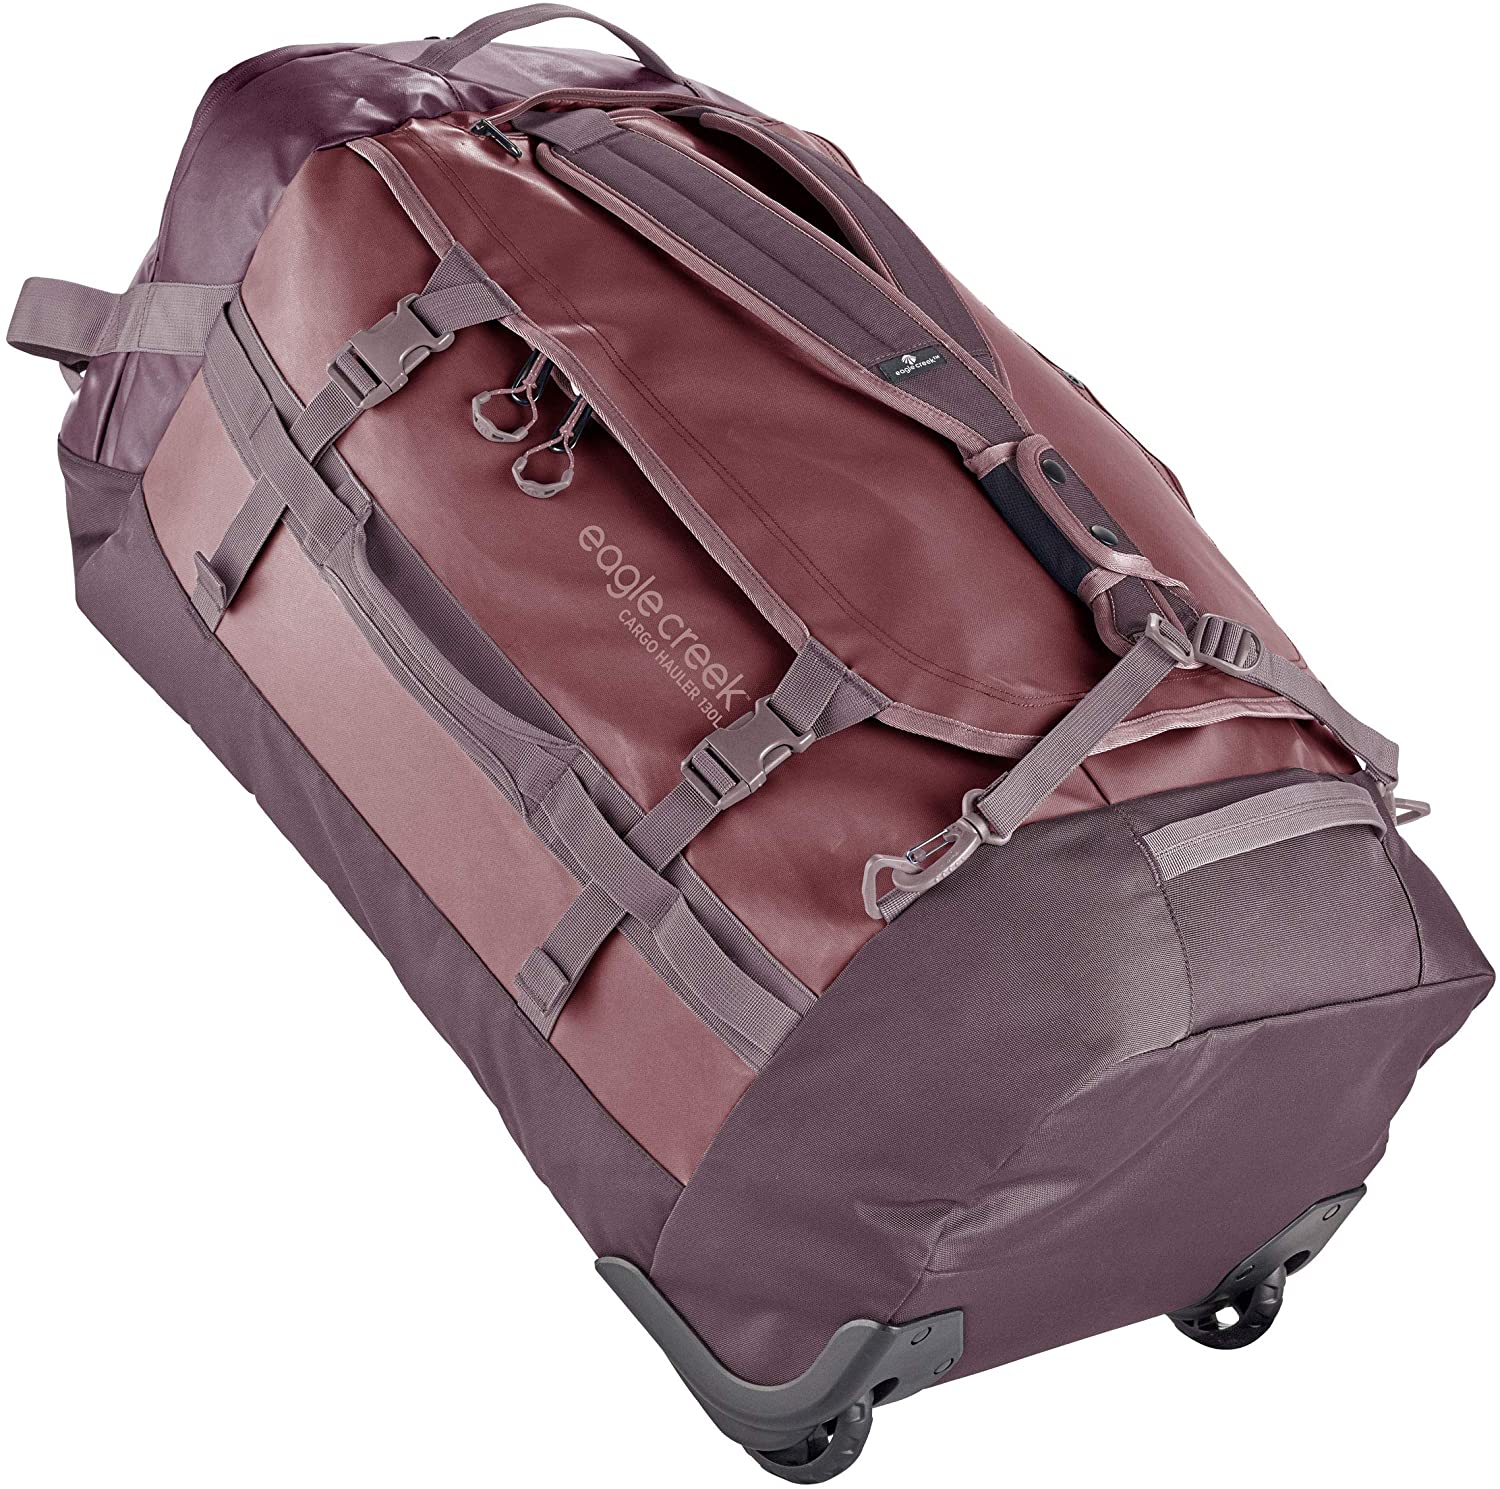 Eagle Creek Cargo Hauler Wheeled Duffel 130L in Earth Red color from the front